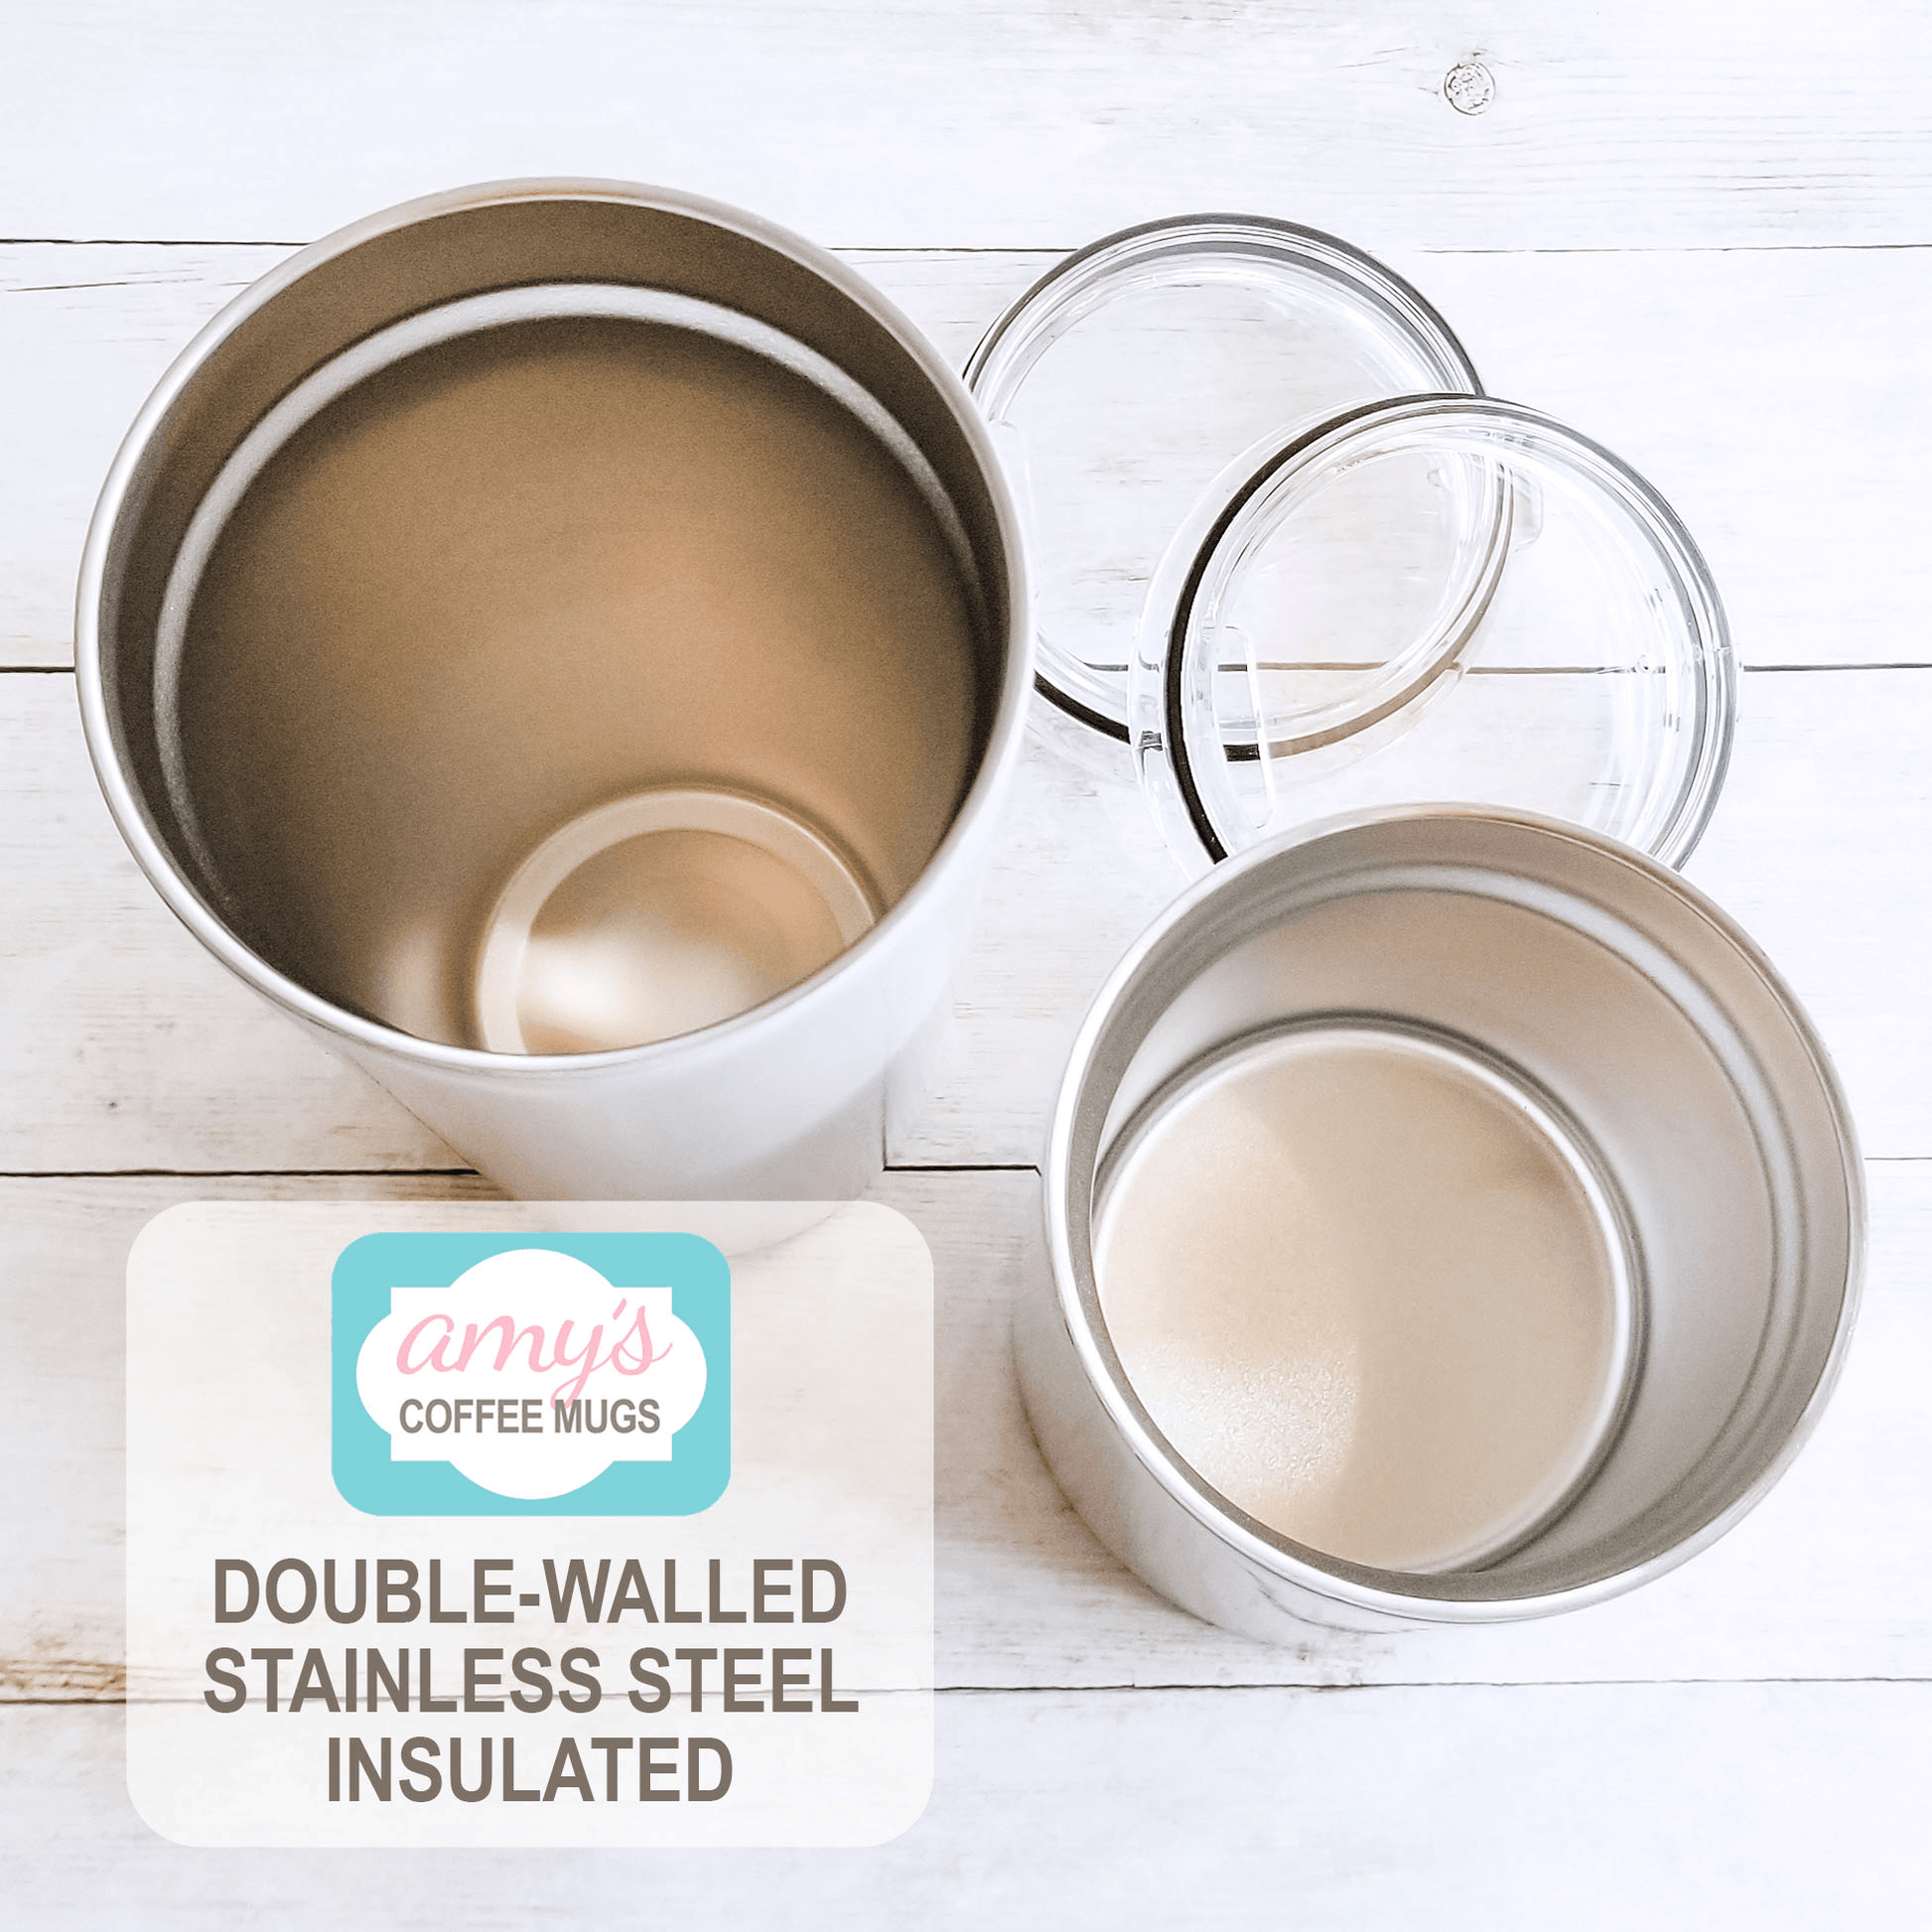 Double-walled stainless steel Tumbler Cups at Amy's Coffee Mugs